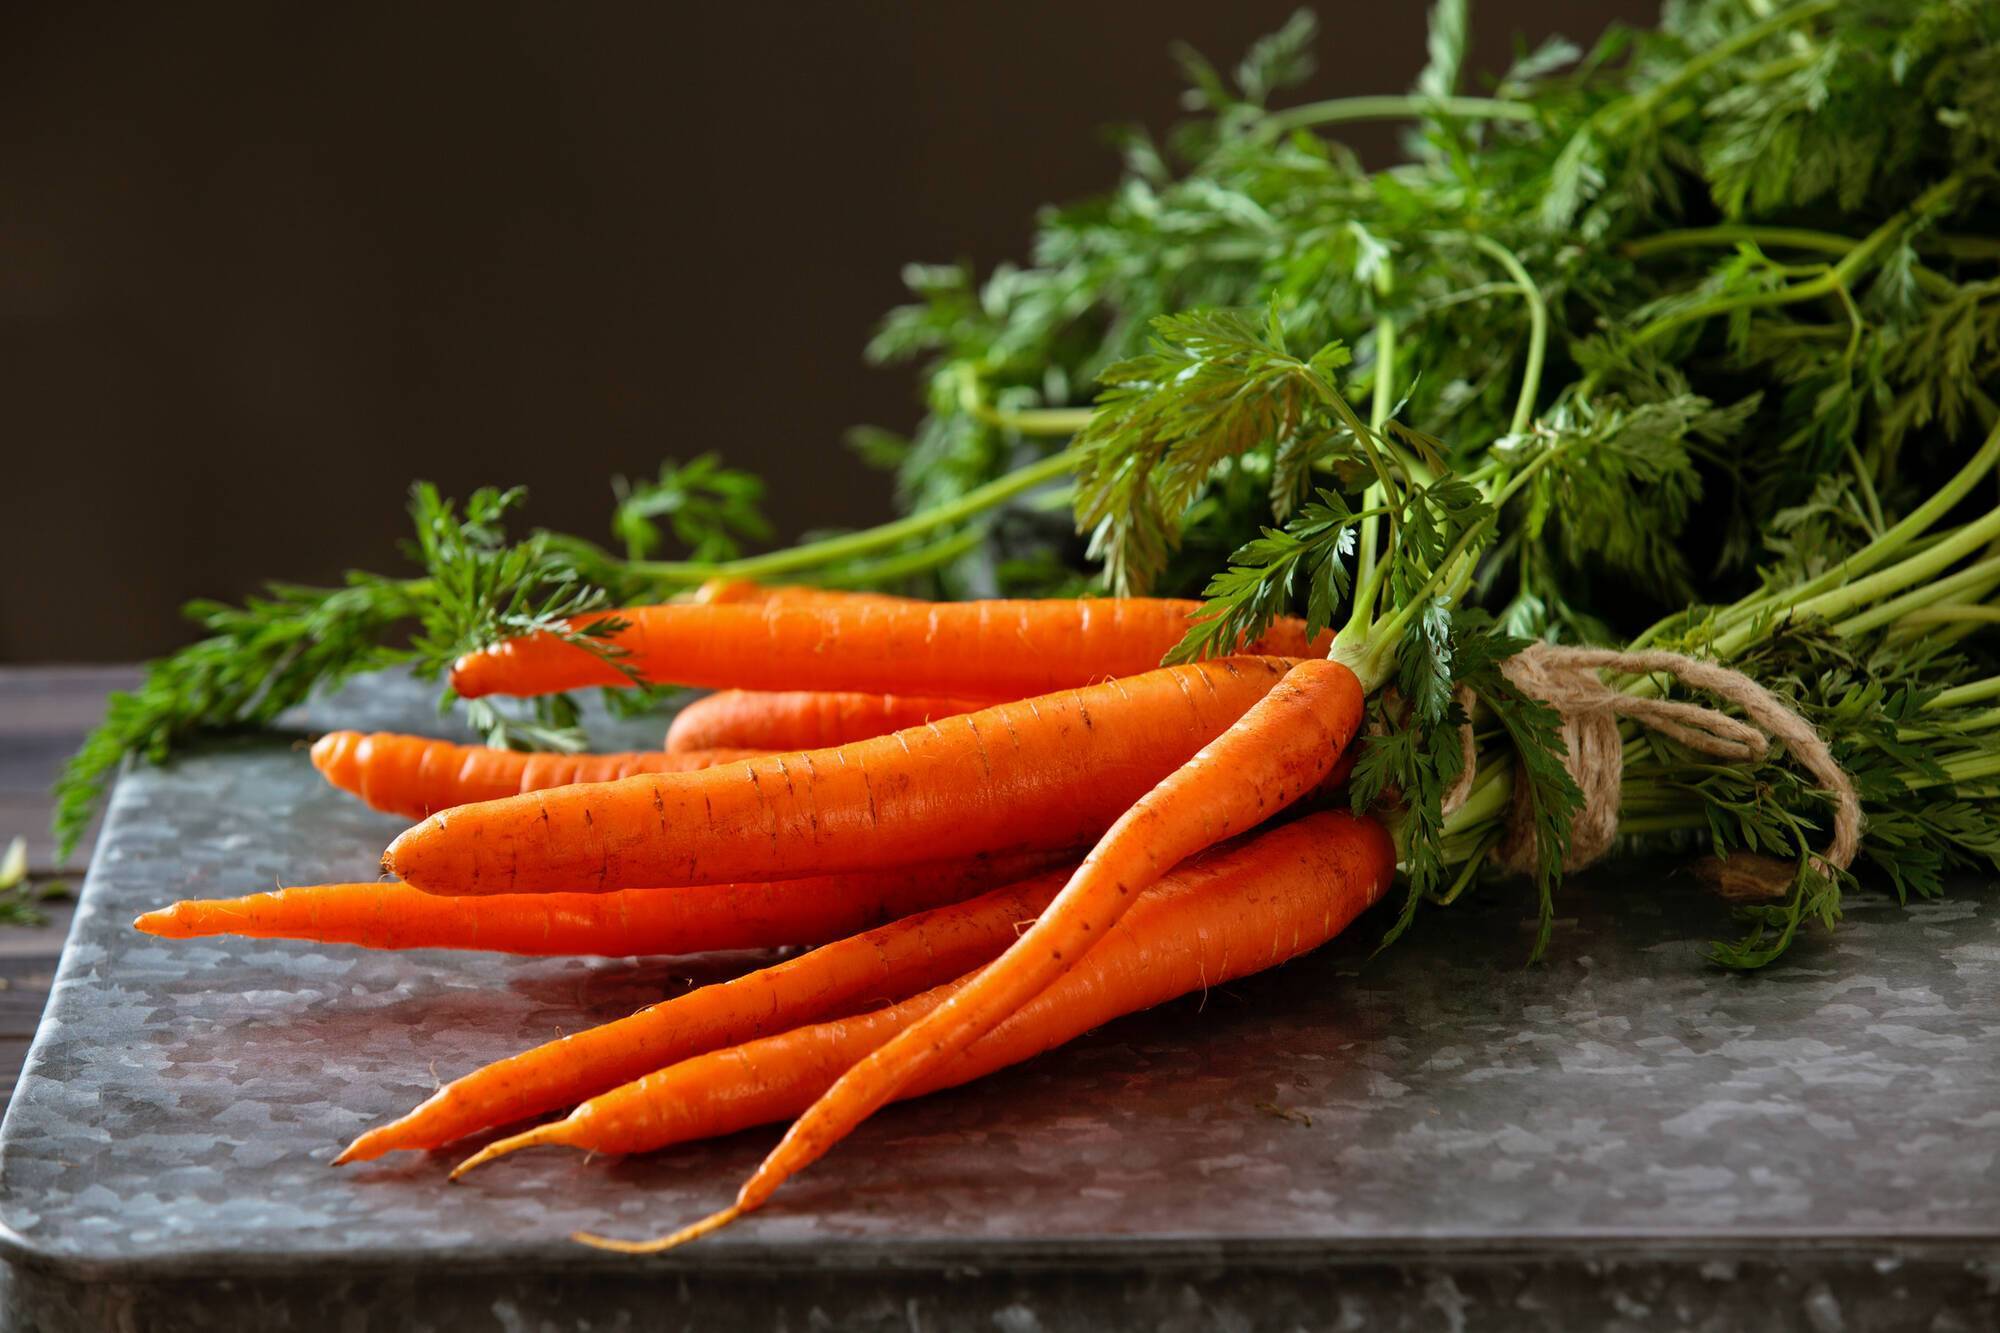 Useful properties of carrots, which few people know about, are announced